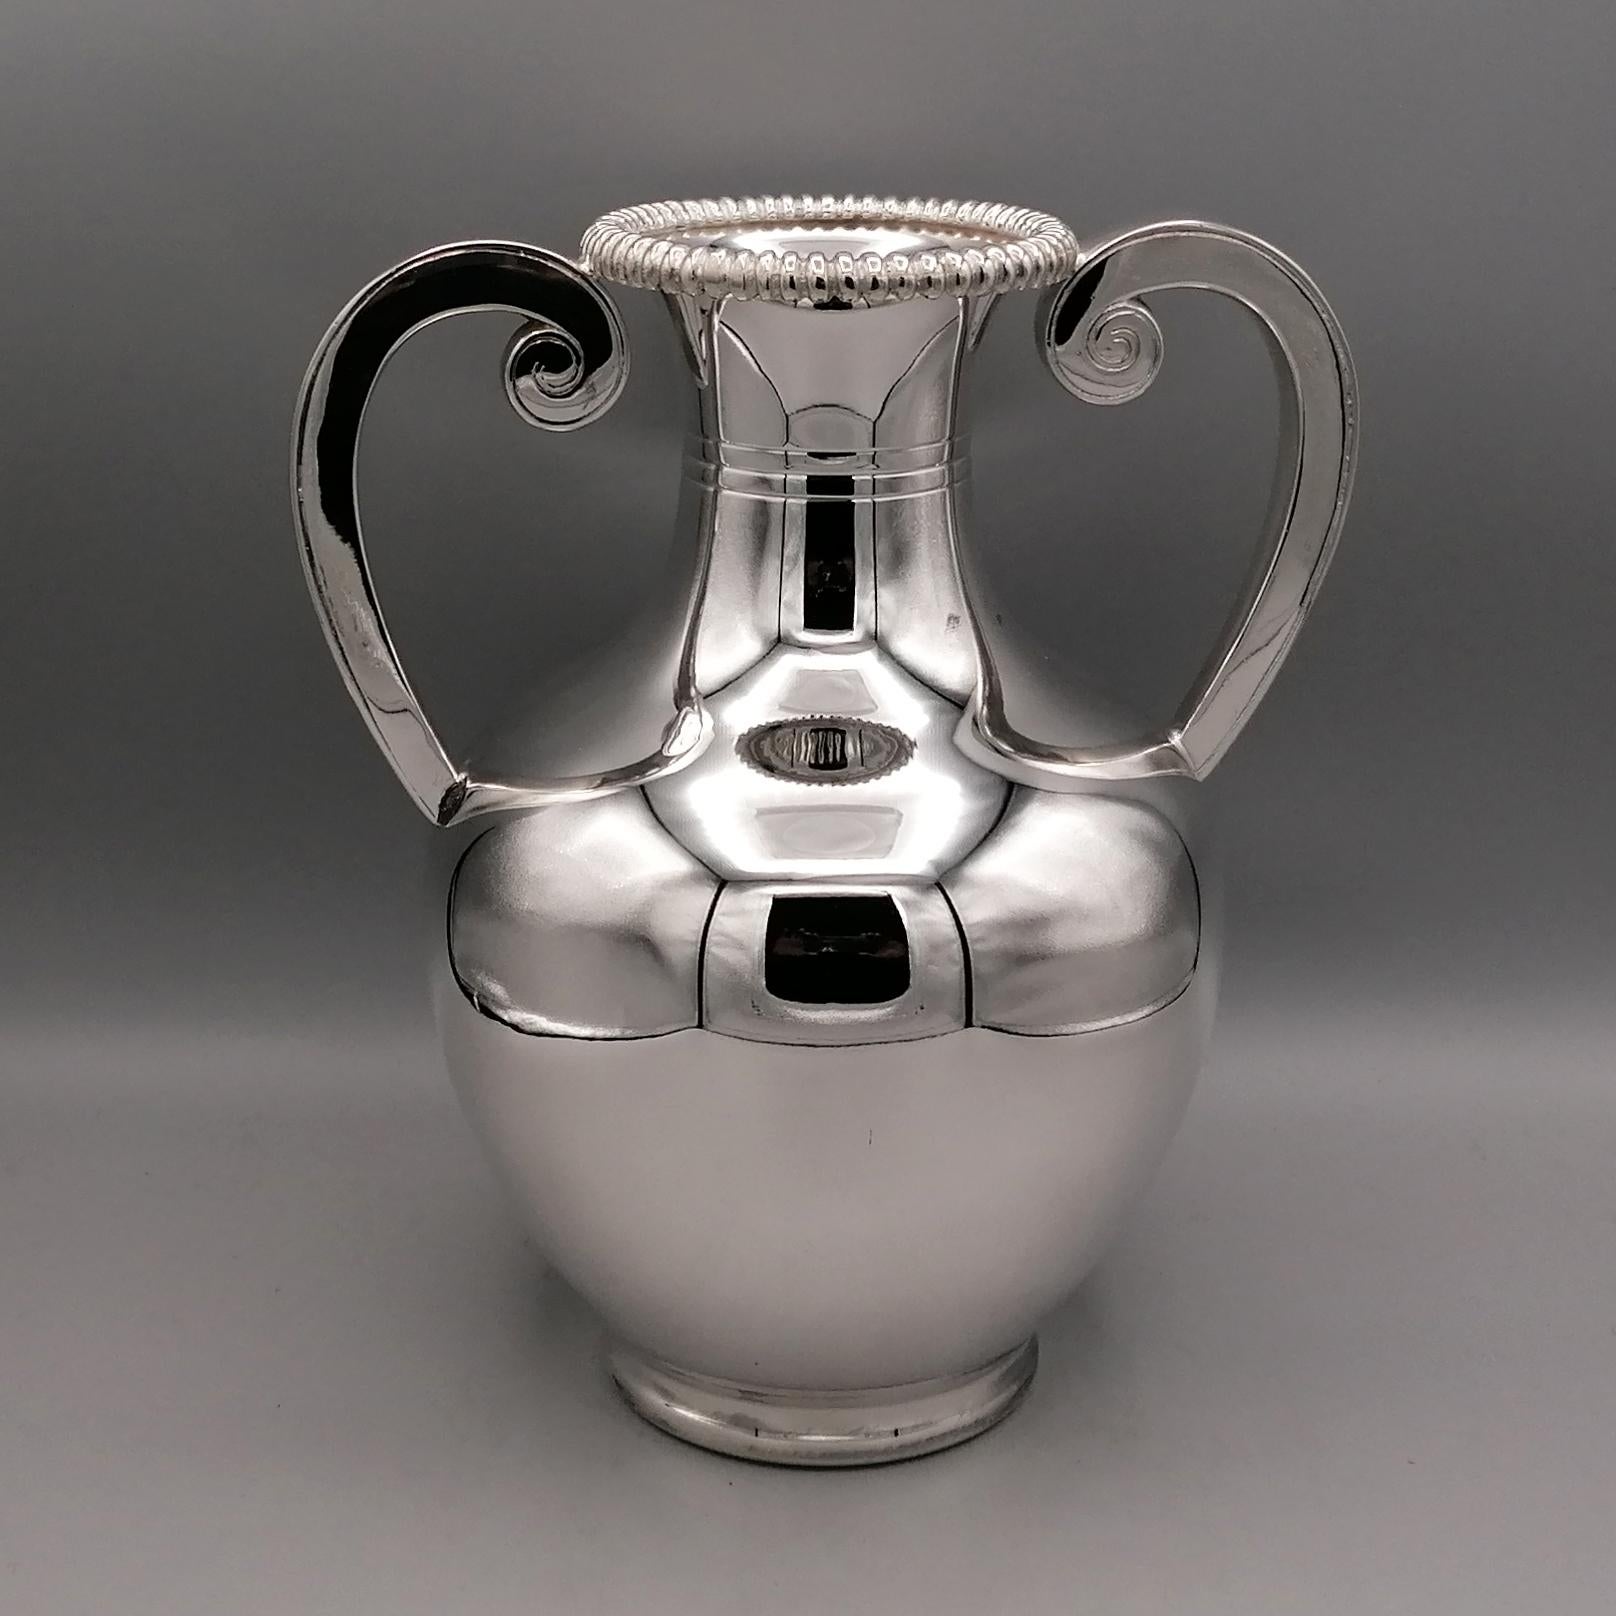 Amphora vase with handles in 800 solid silver in neoclassical style.
The body is round, rounded and completely smooth. Only on the neck of the amphora were 3 grooves made to break up the uniformity of the structure.
A border with a pod design has